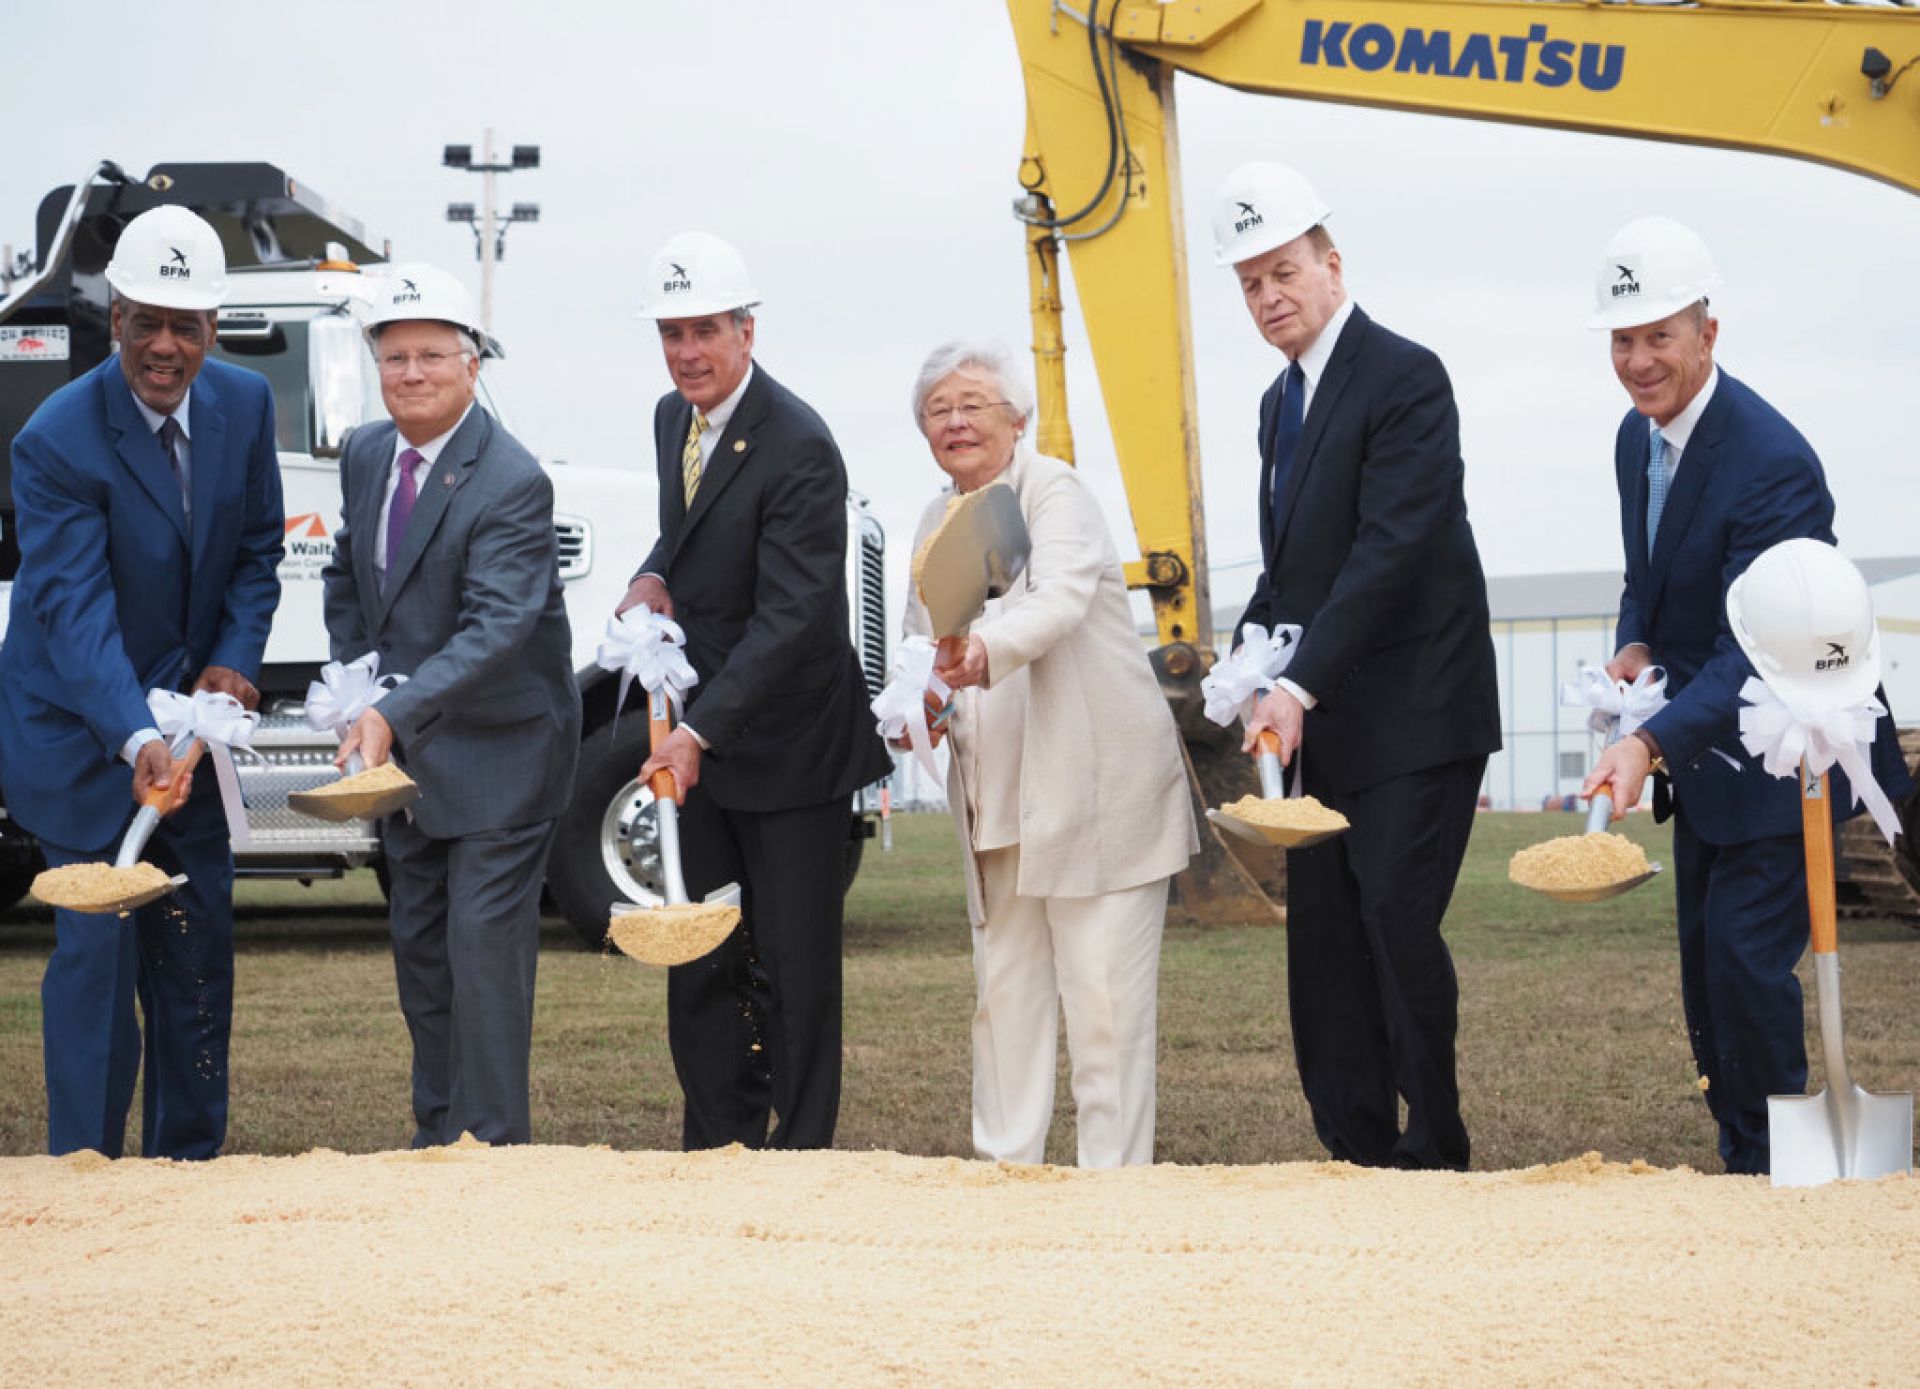 Mobile breaks ground on $330M airport project